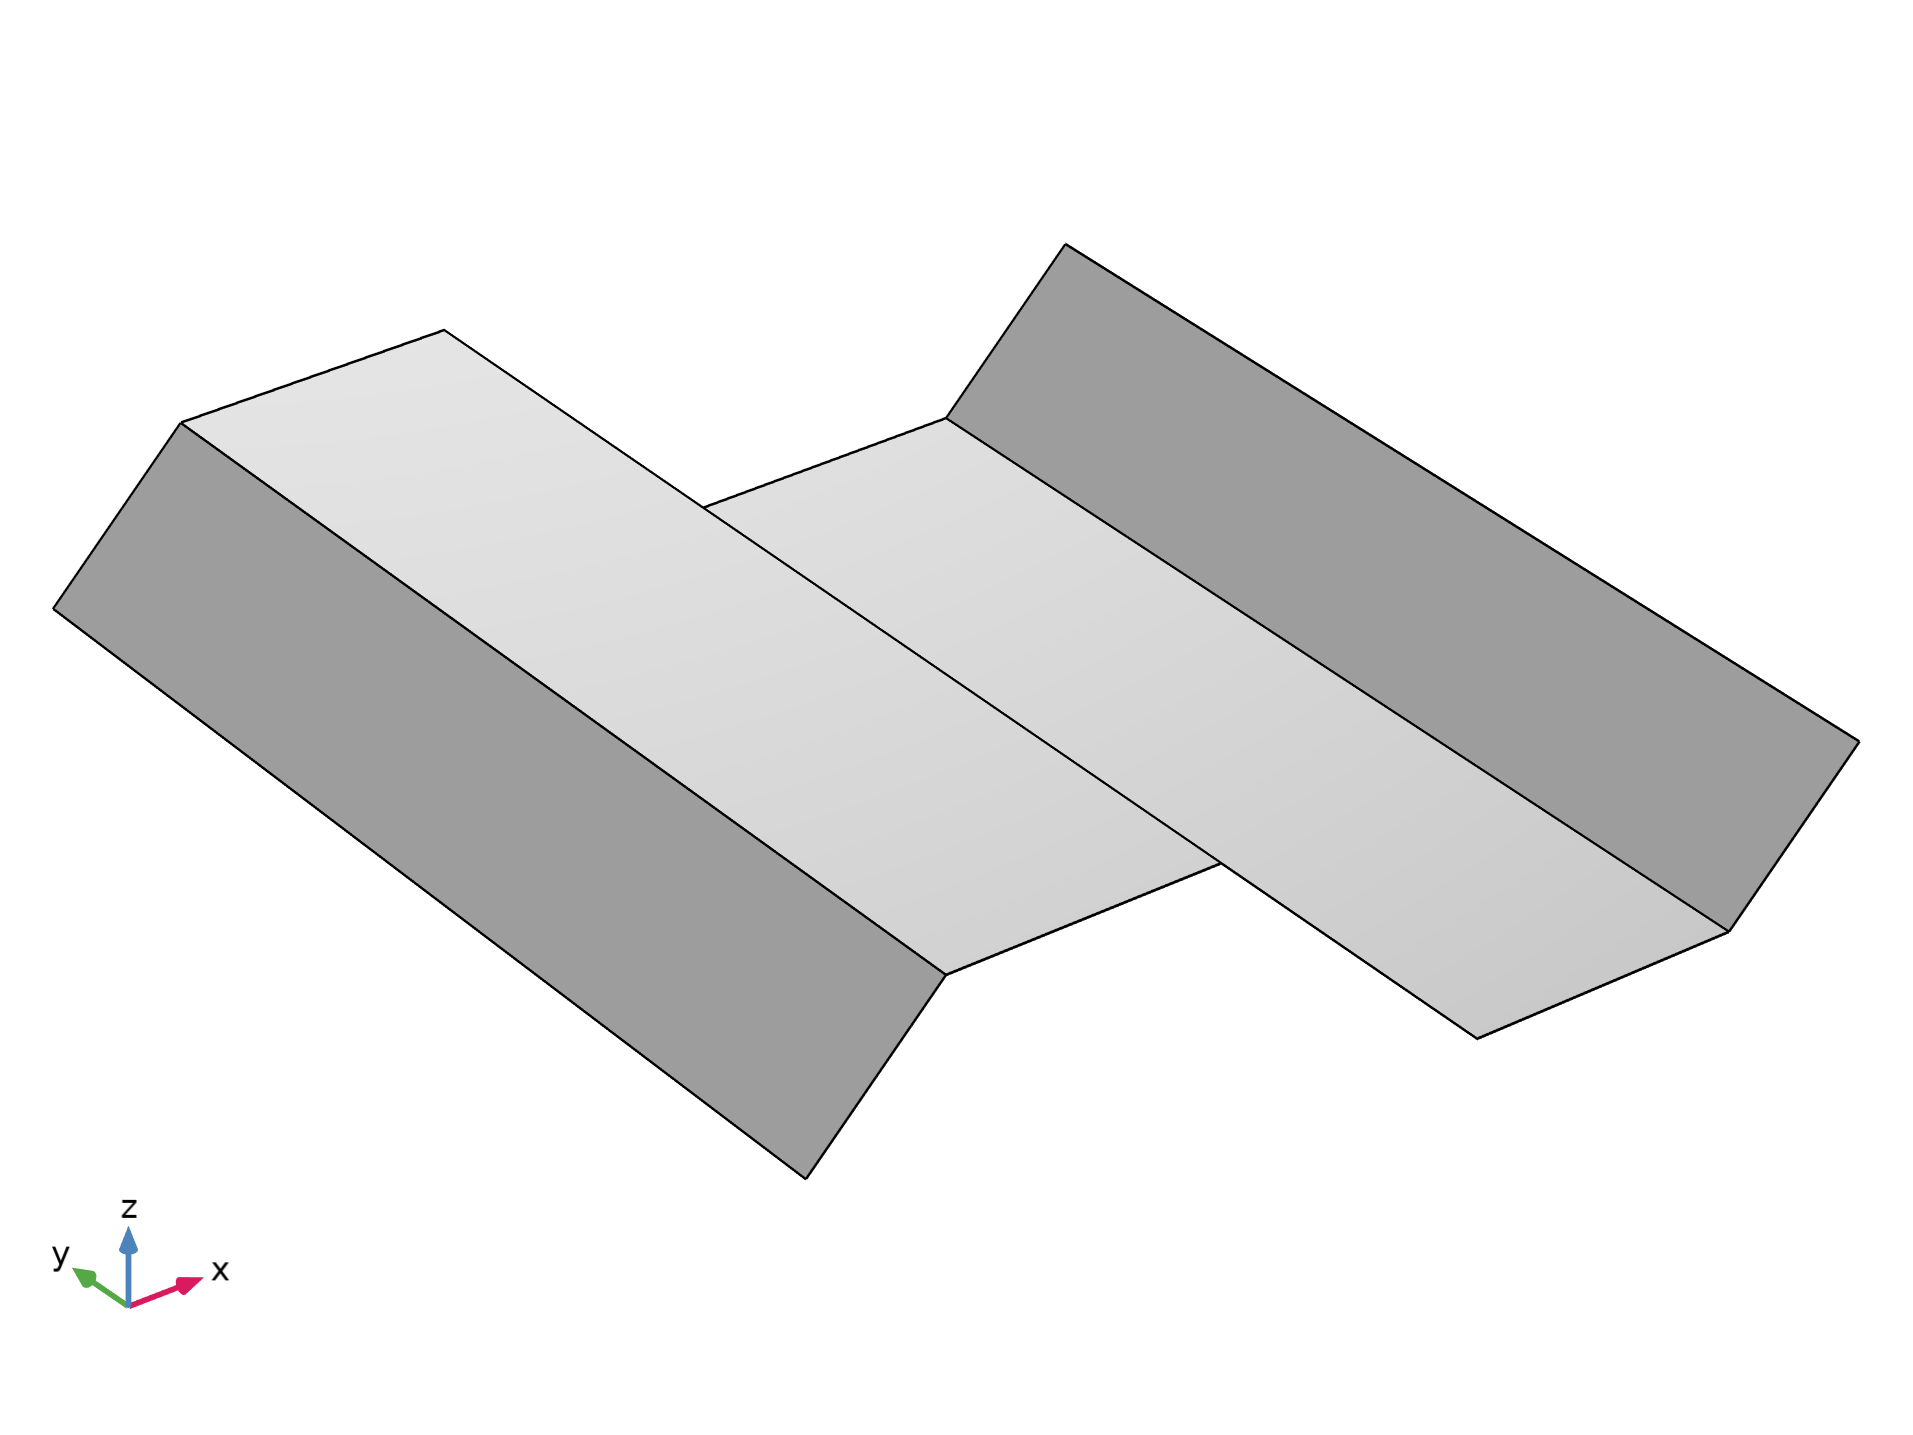 The unit cell of a trapezoidal corrugation.